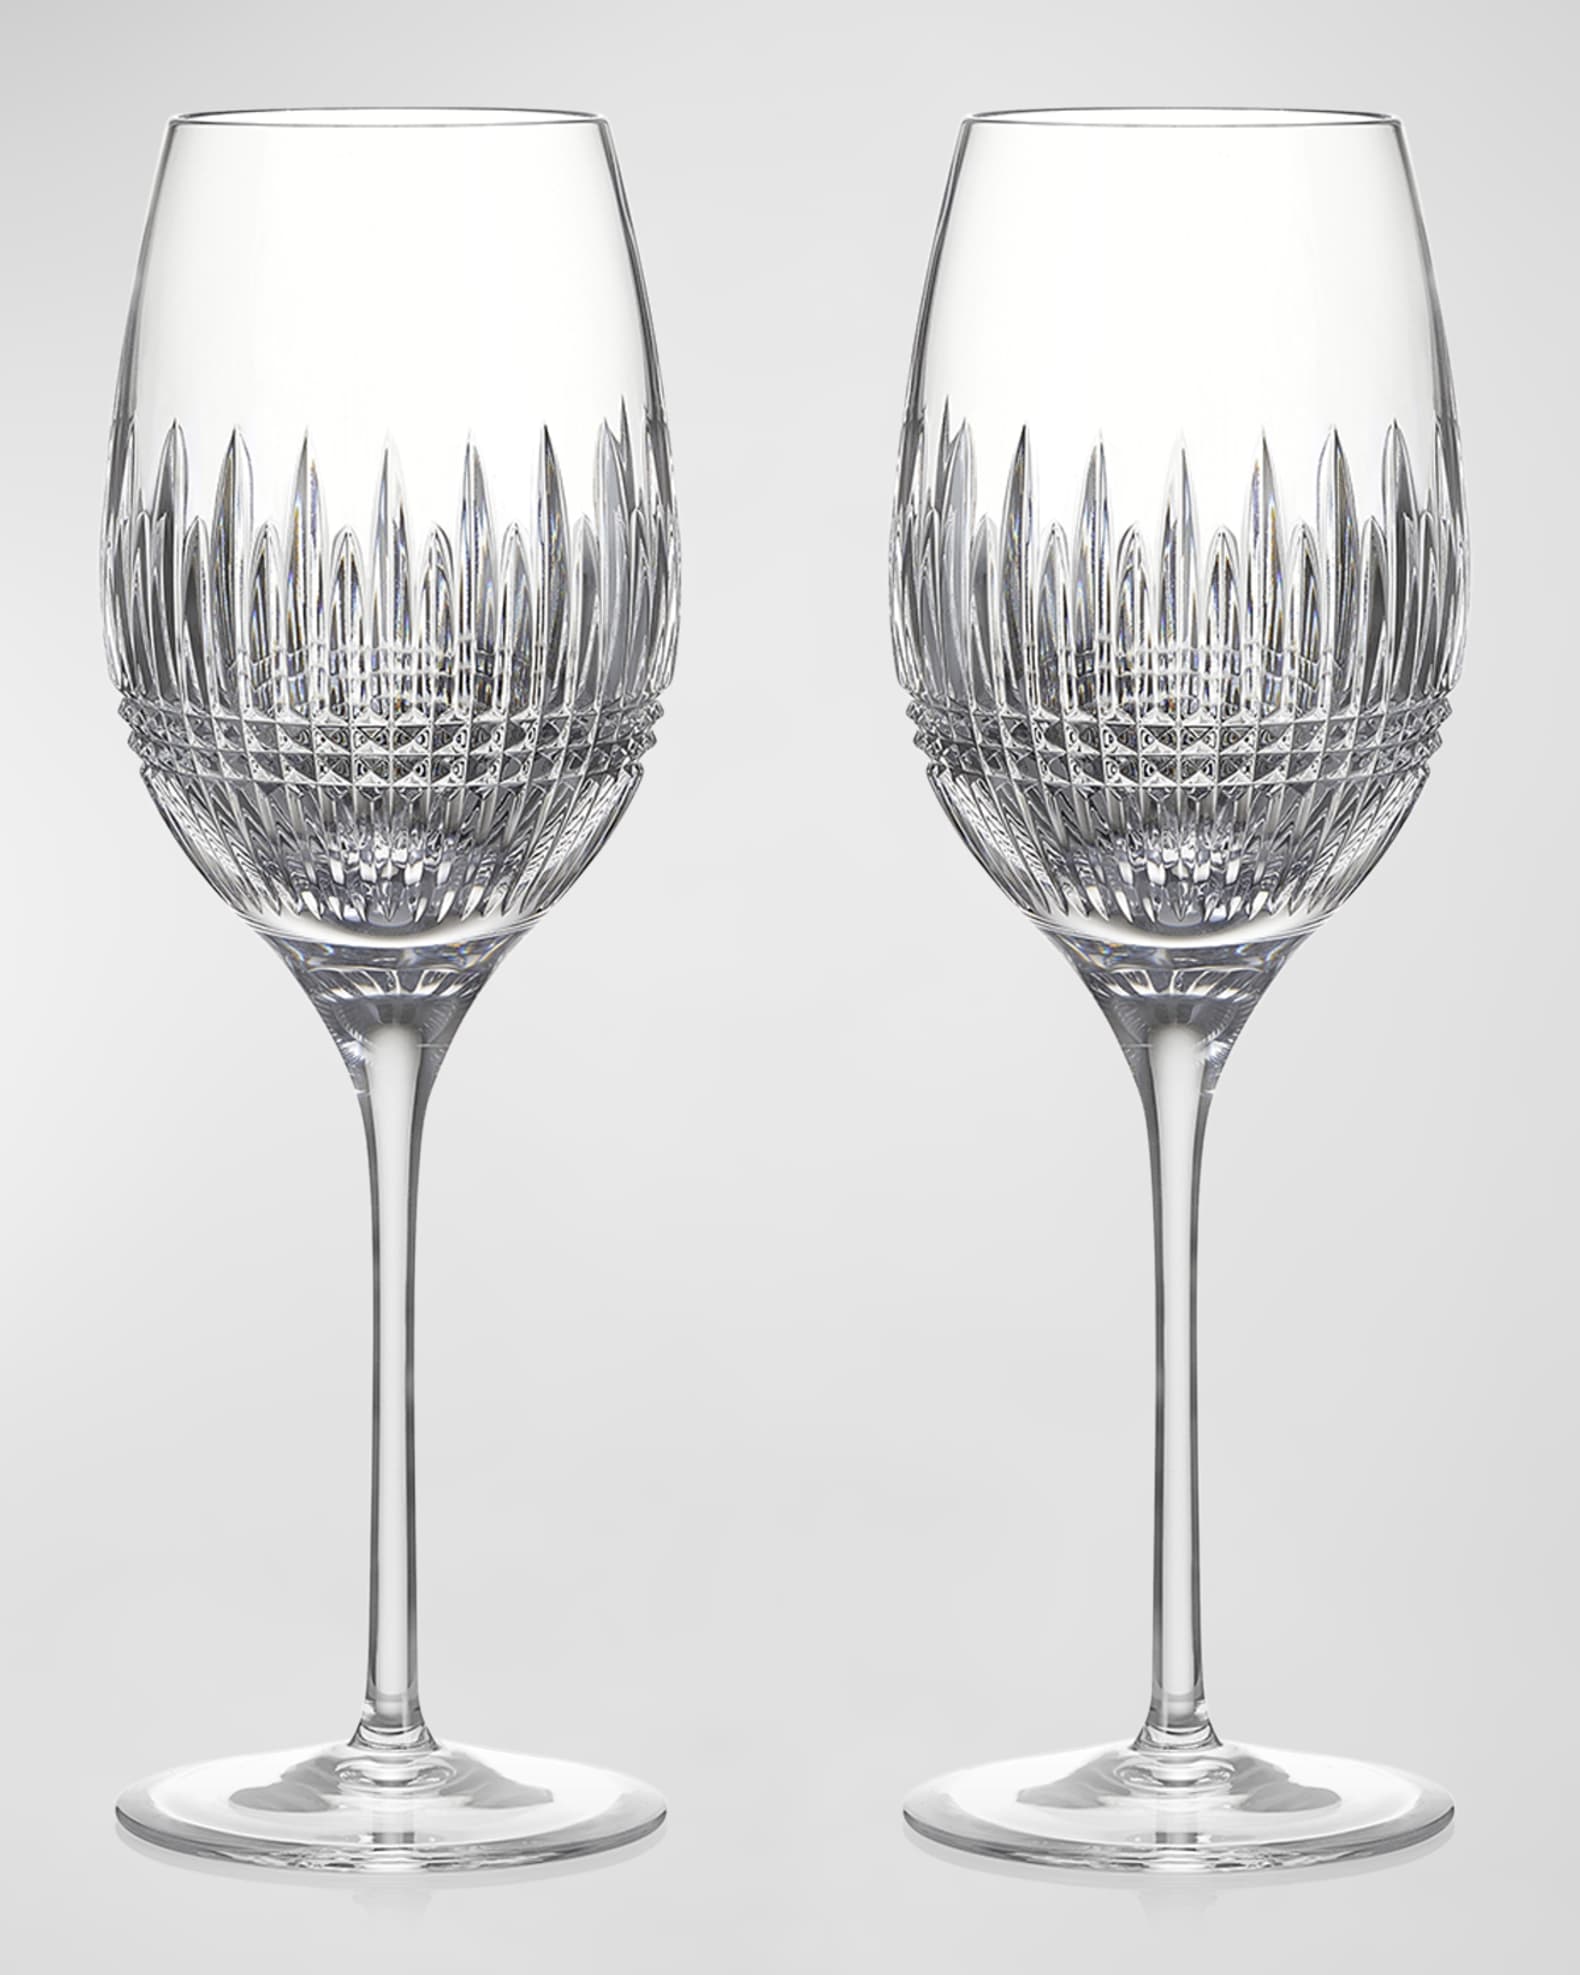 Waterford Crystal Irish Lace Crystal White Wine Glasses, Set of 2